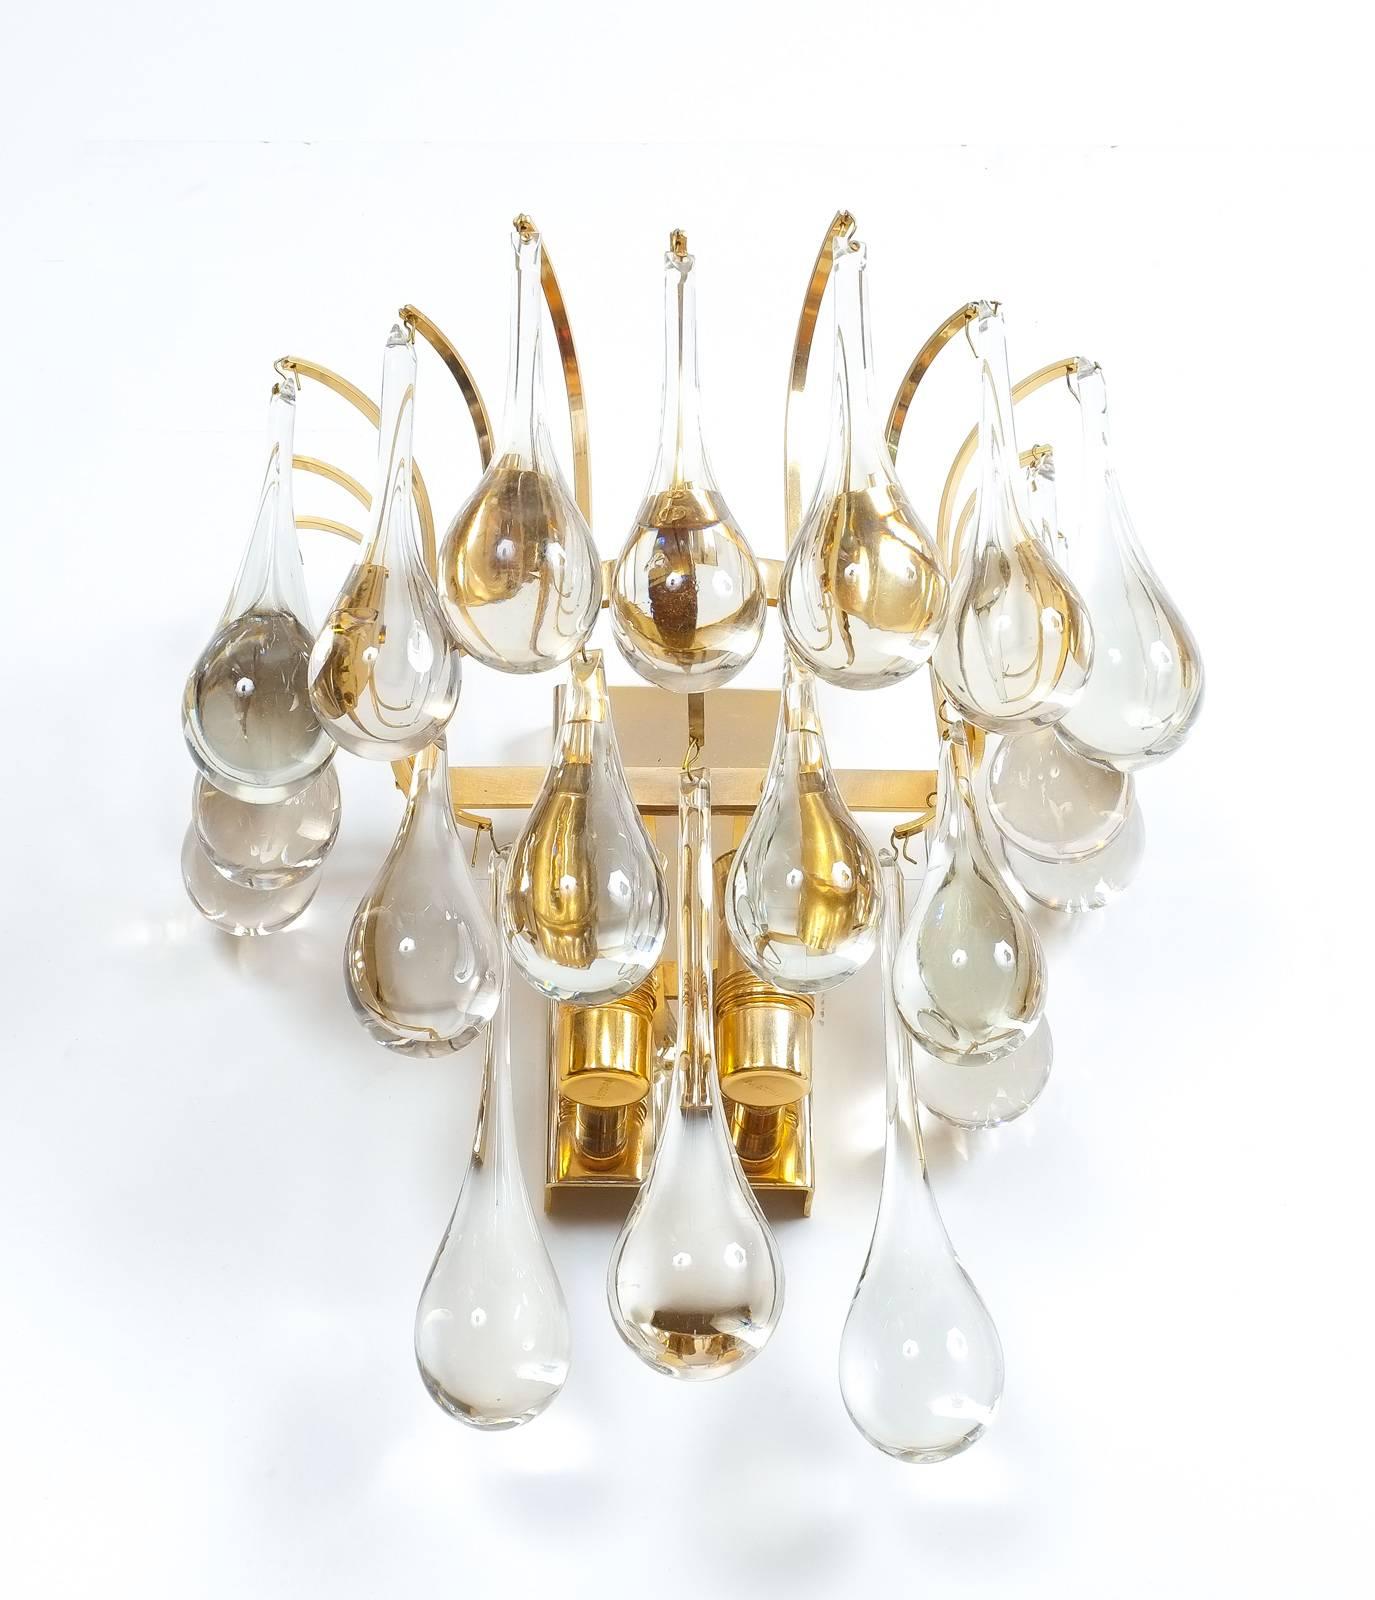 Beautiful multi-tiered pair of Murano glass tear drop sconces composed of a multitude of handblown smooth Murano glass drops hanging from a delicate gildened brass hardware. It's in excellent condition with a total of two bulbs per light. They were